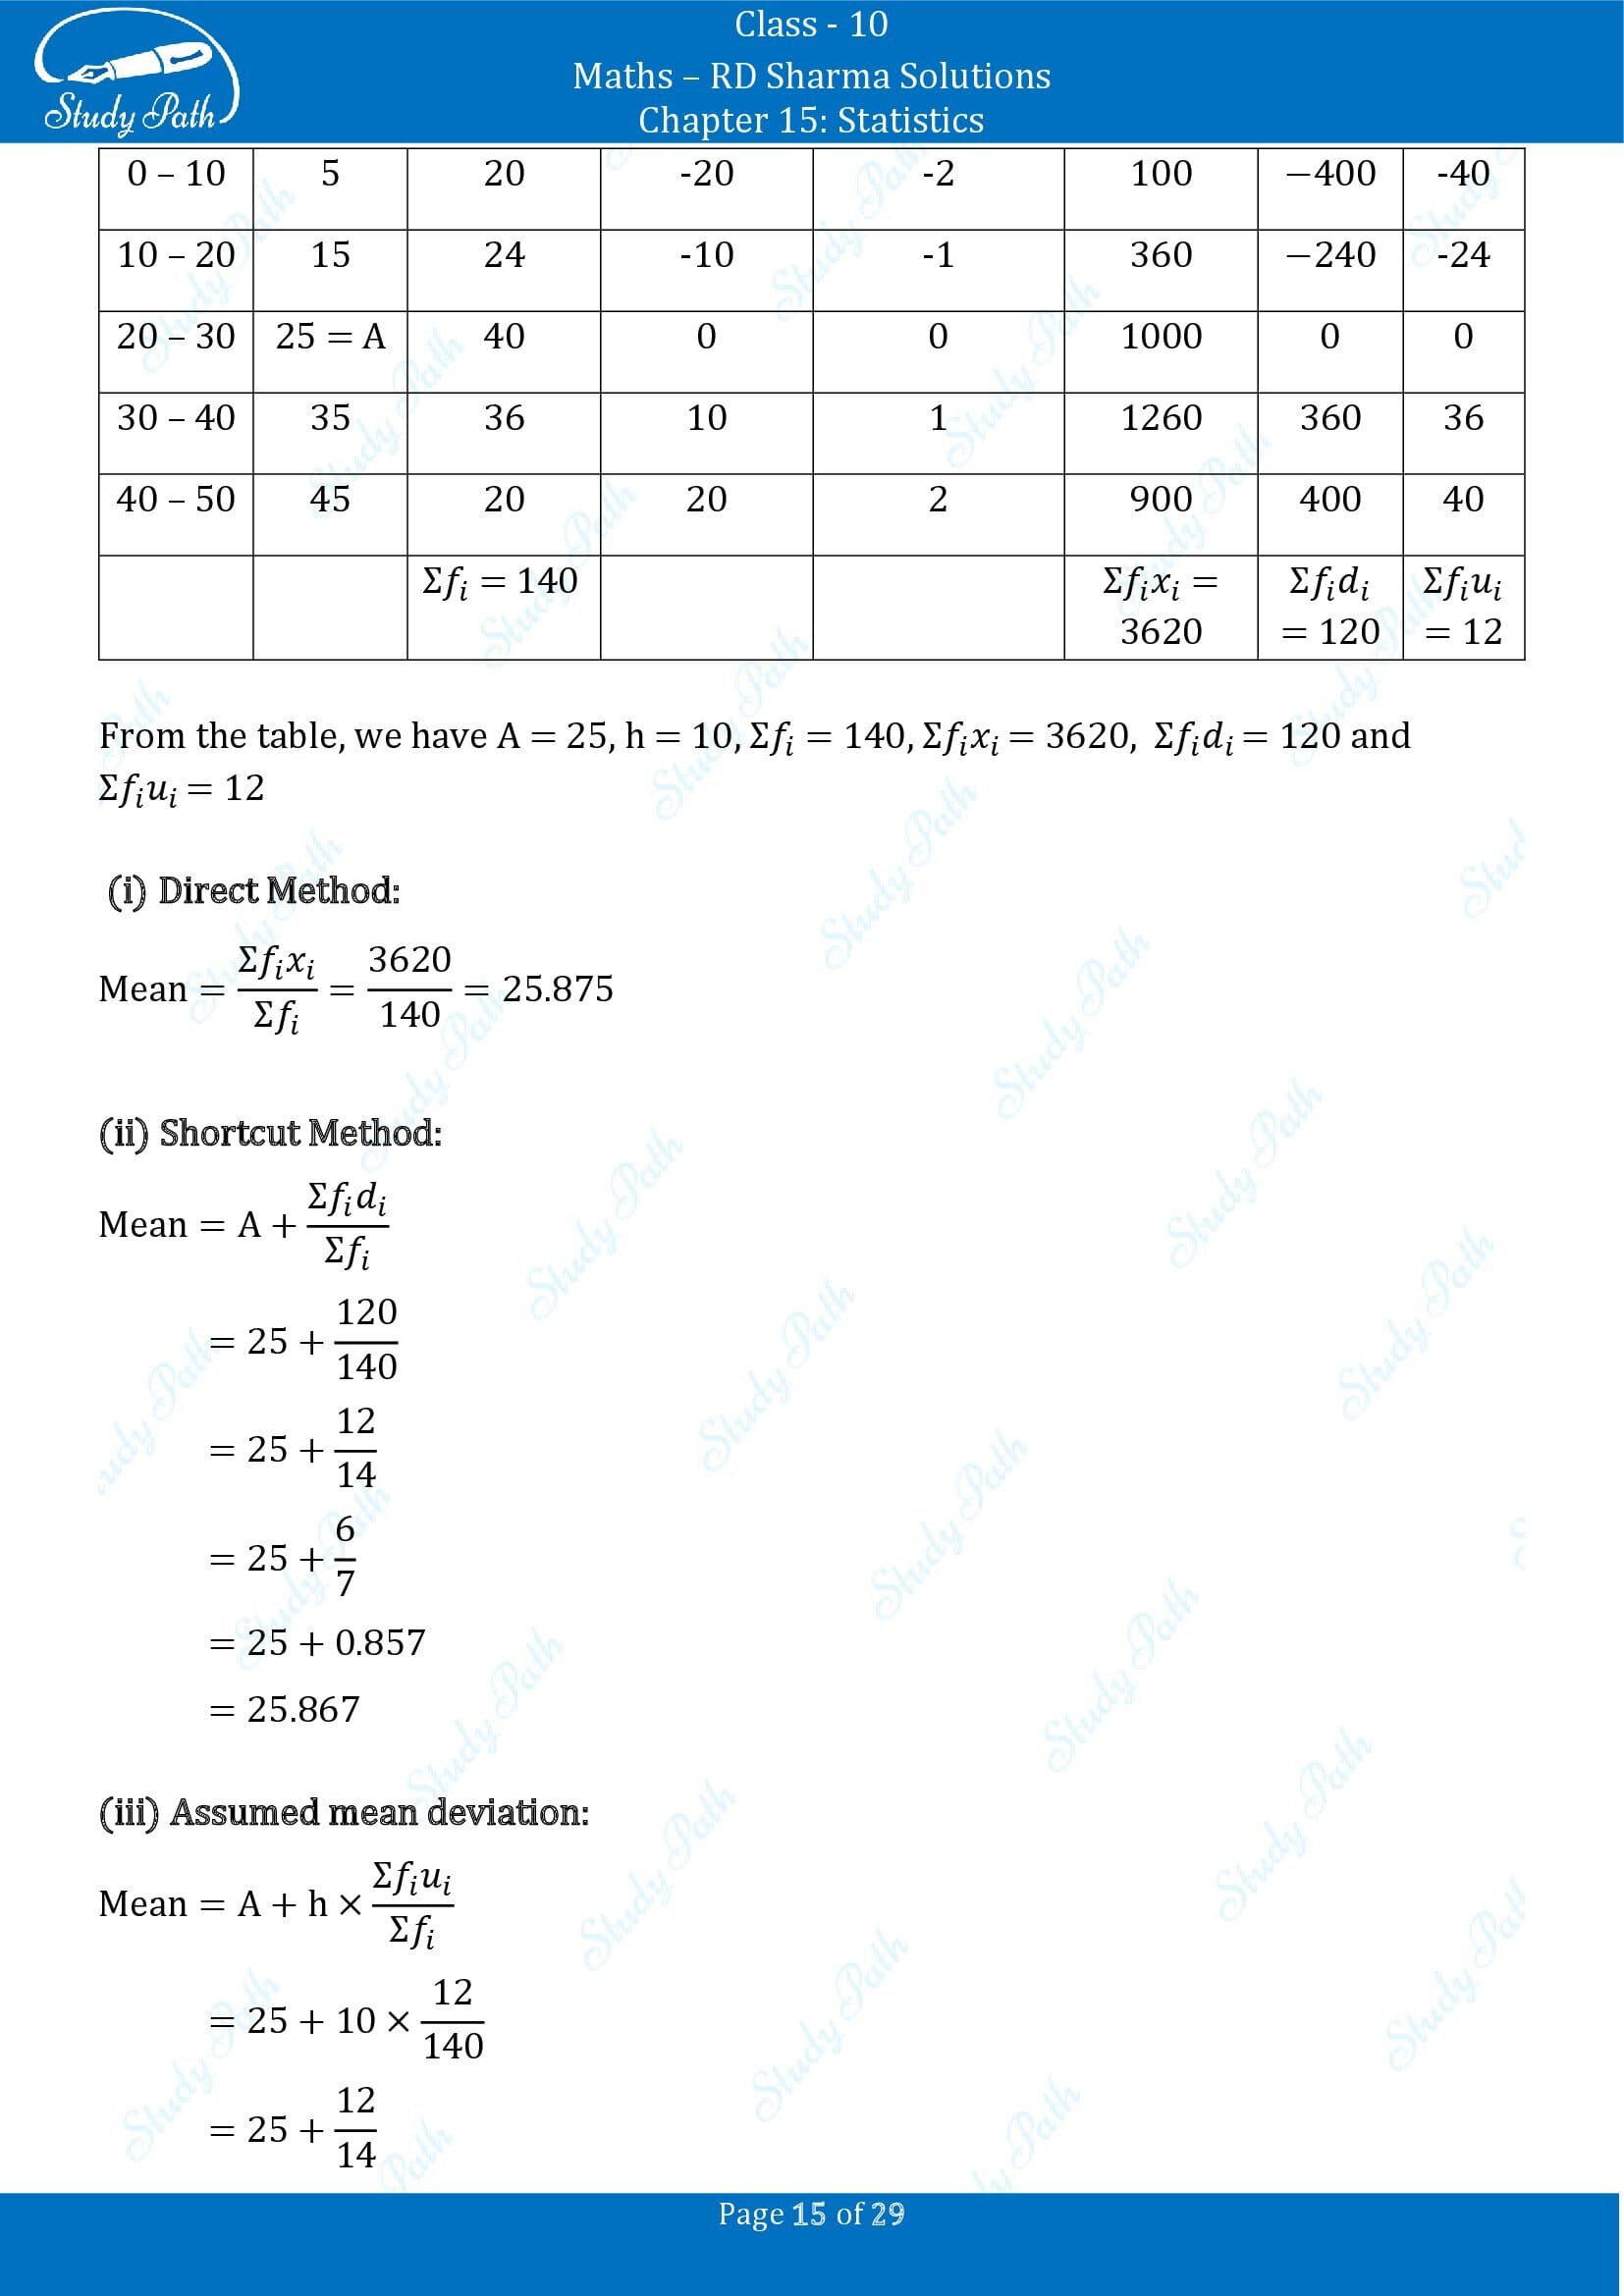 RD Sharma Solutions Class 10 Chapter 15 Statistics Exercise 15.3 0015